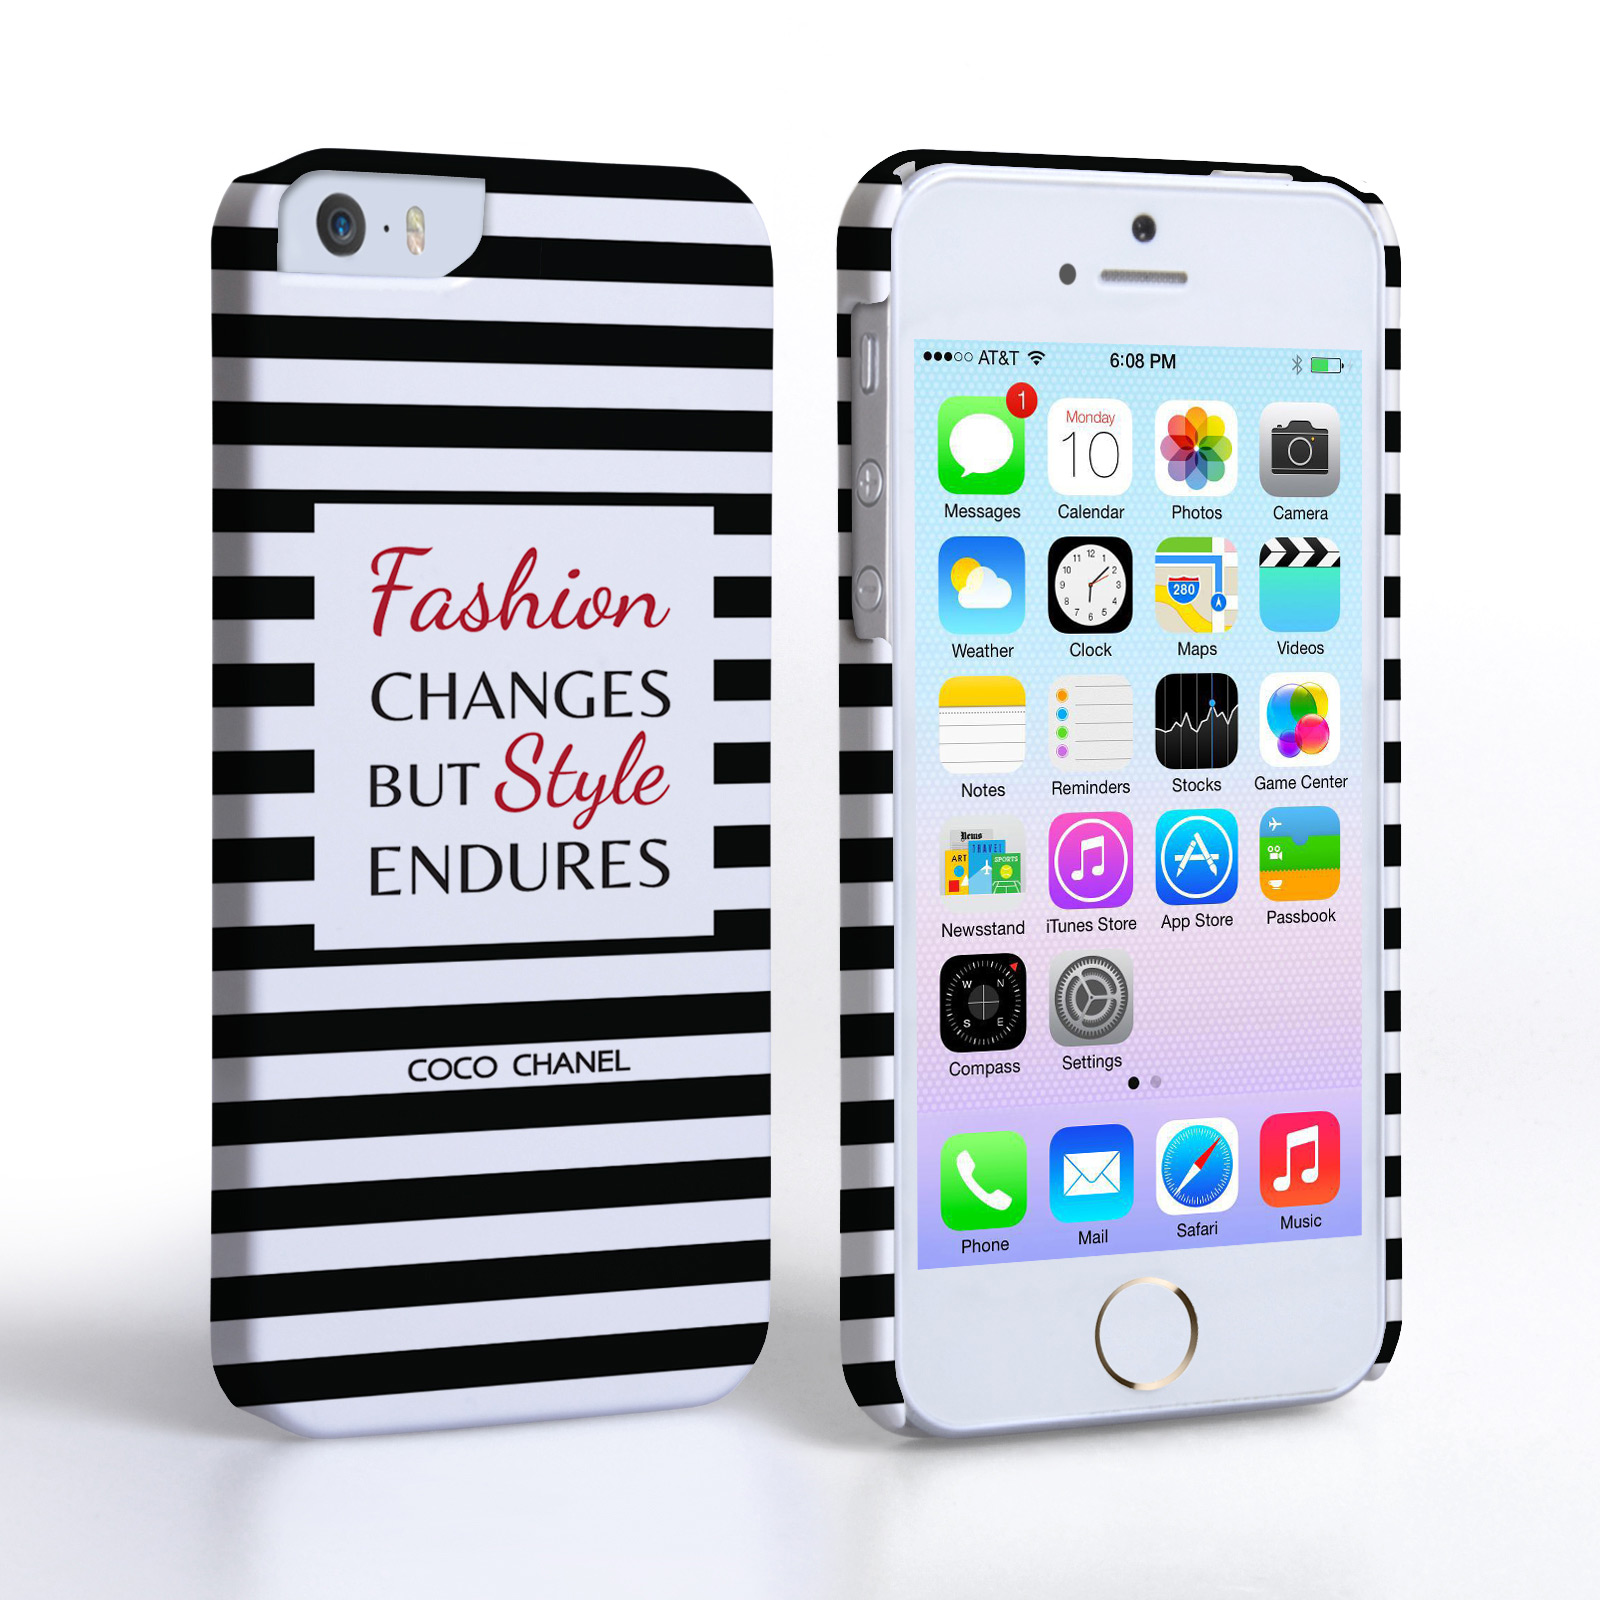 Caseflex iPhone 5/5s Chanel ‘Fashion Changes’ Quote Case – Black and White